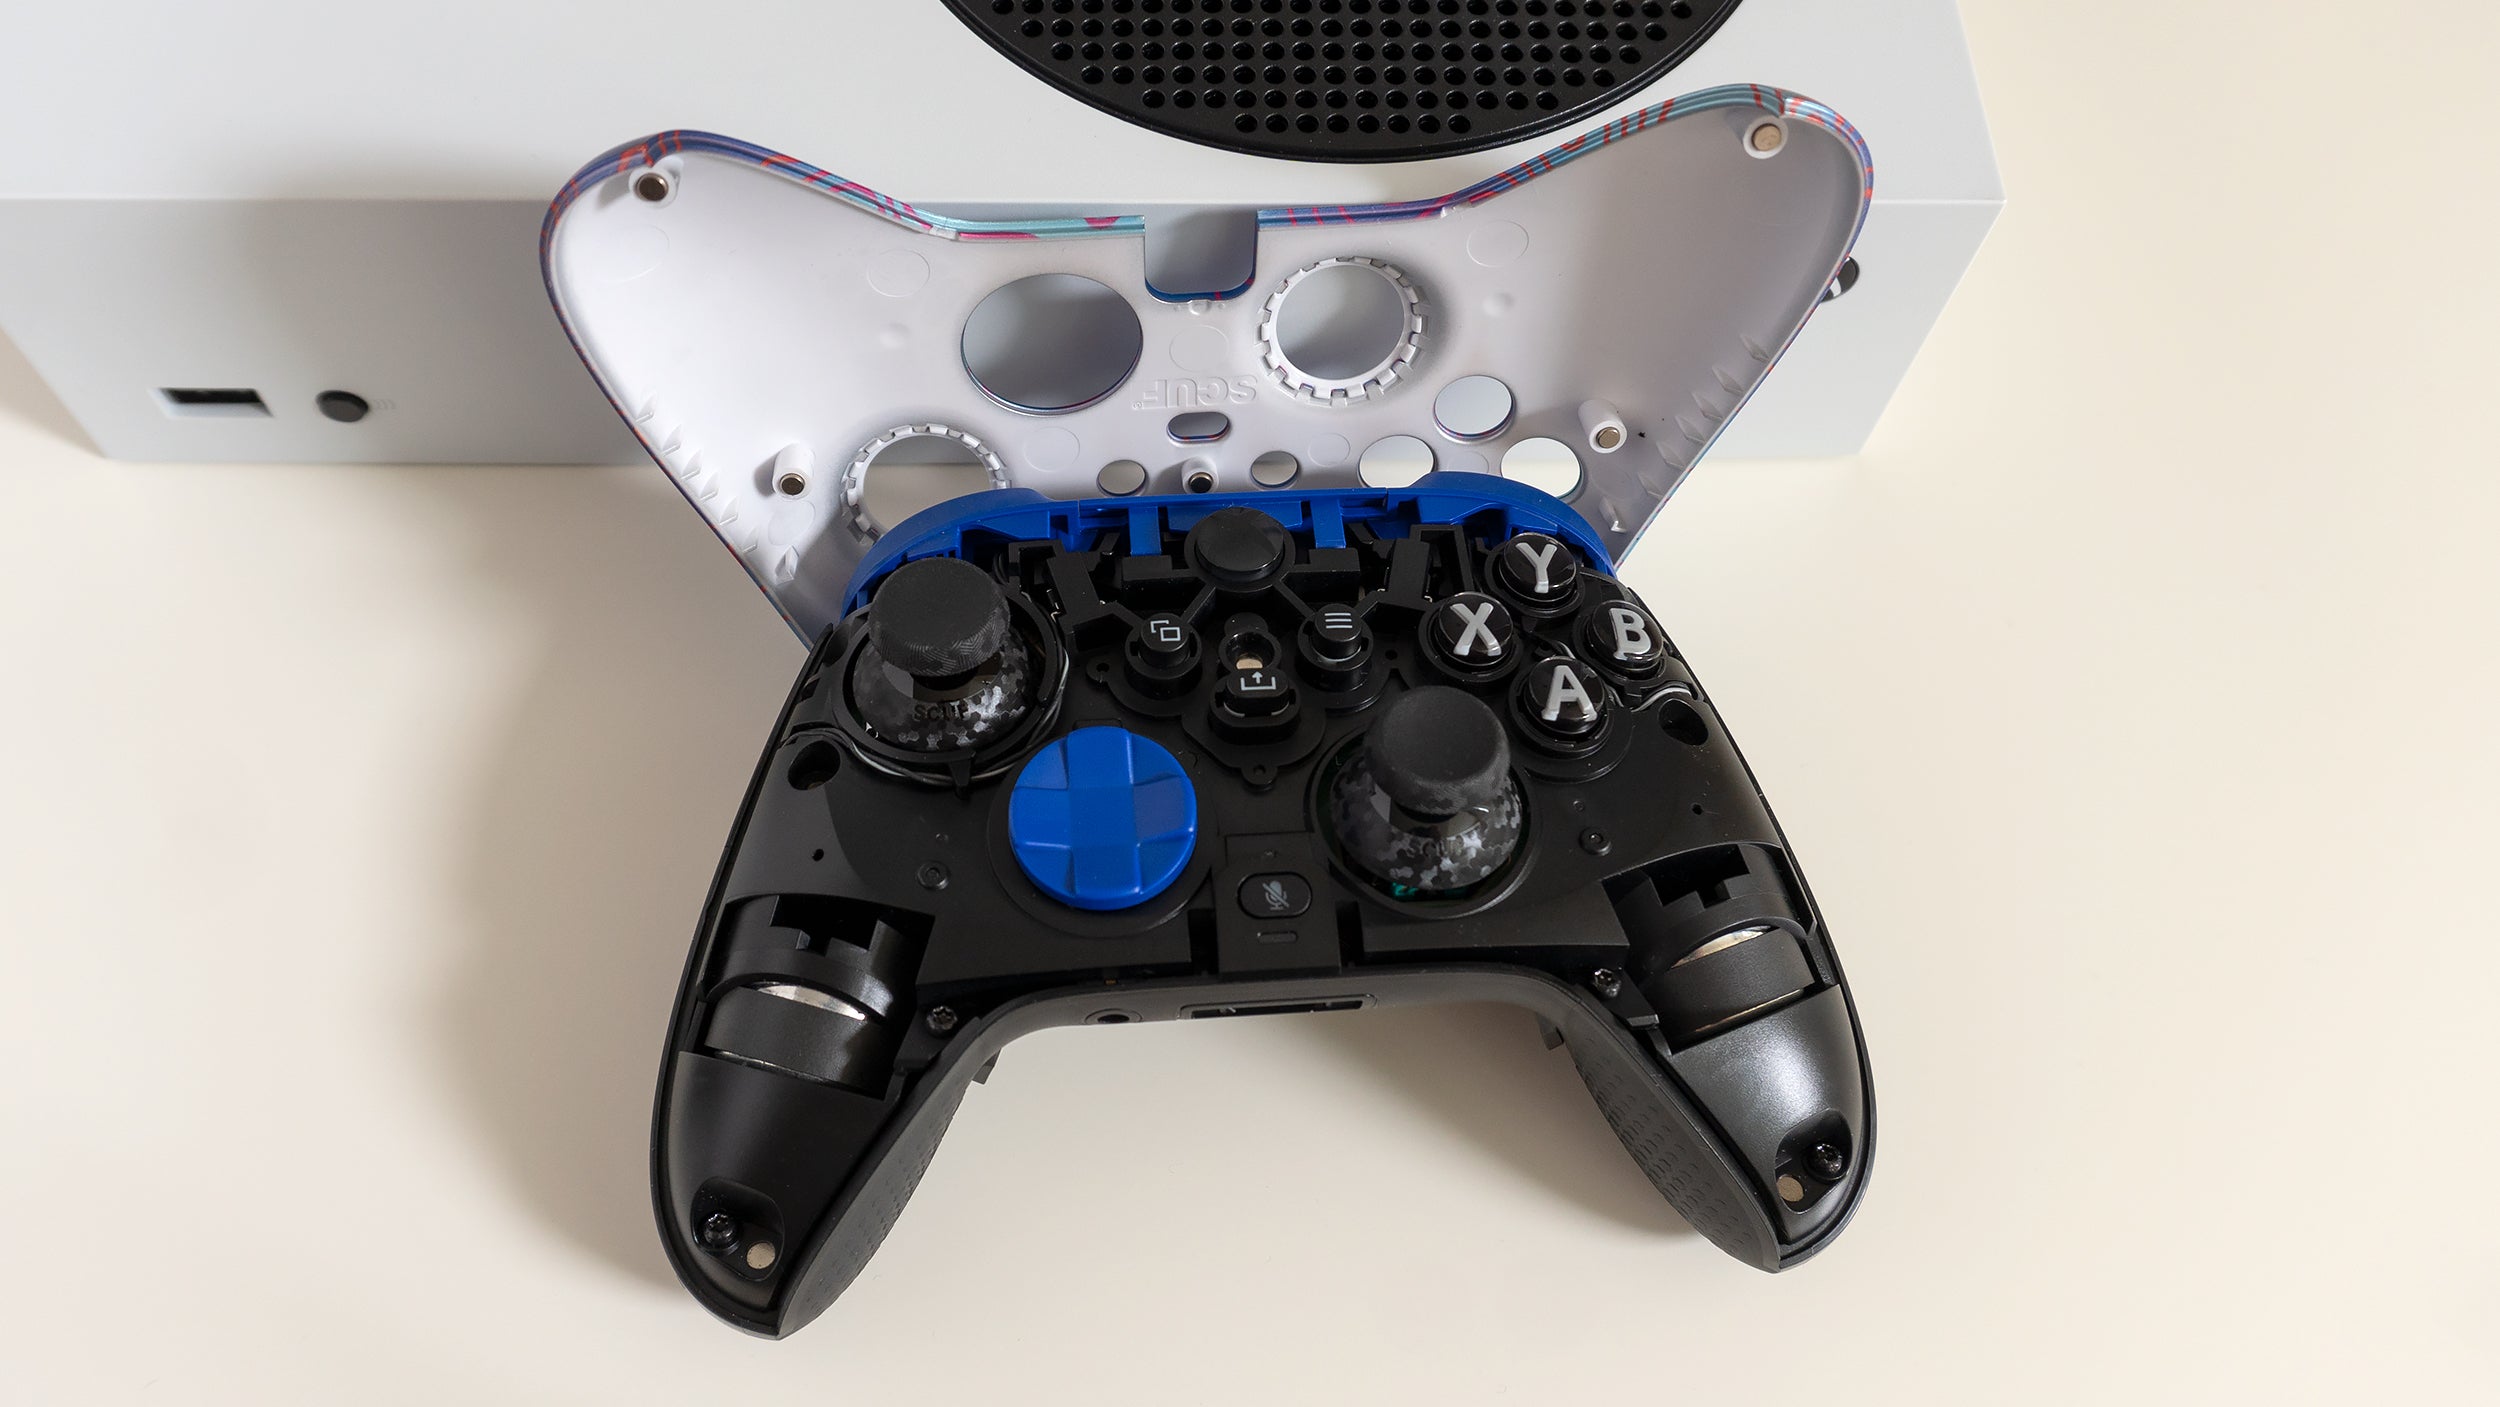 Faceplates are held in place using magnets so they're easy to remove and swap, which also provides easy access to all of the controller's swappable buttons and joysticks. (Photo: Andrew Liszewski - Gizmodo)